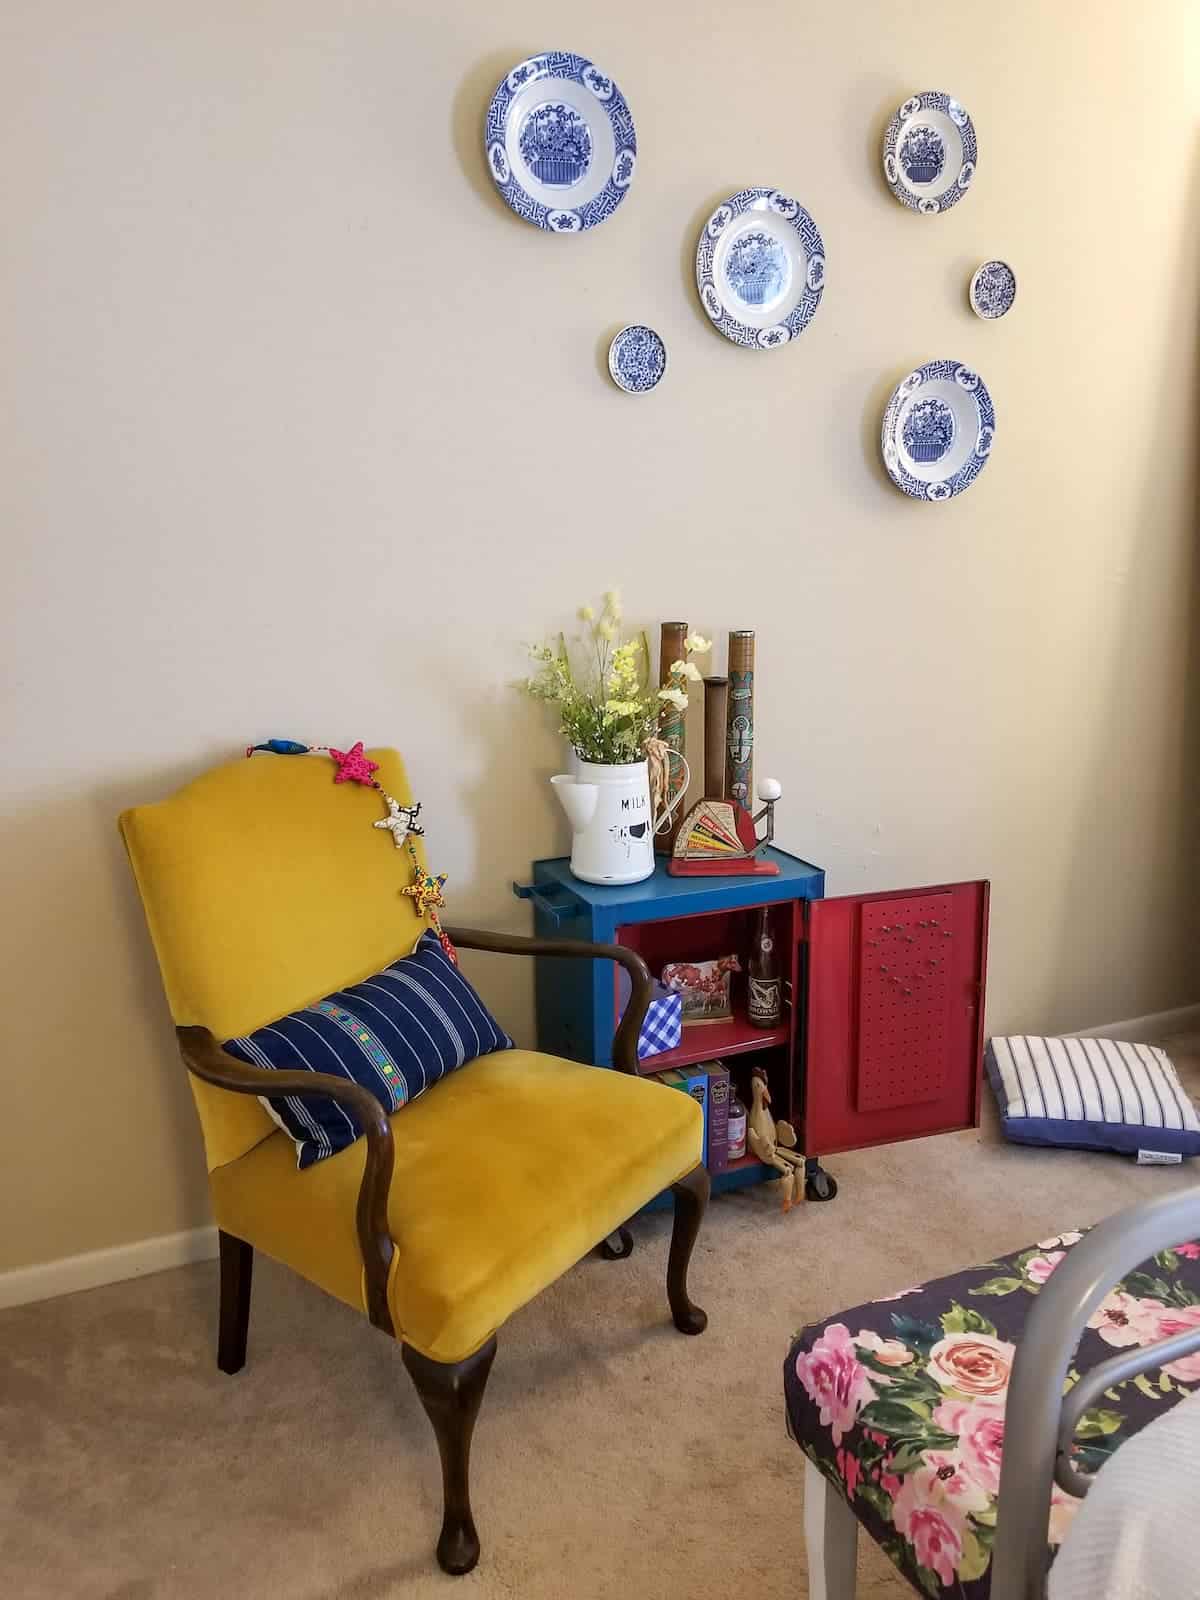 A cozy reading nook with a mustard yellow armchair, surrounded by decorative blue and white plates on the wall and a small side table with books and plants.